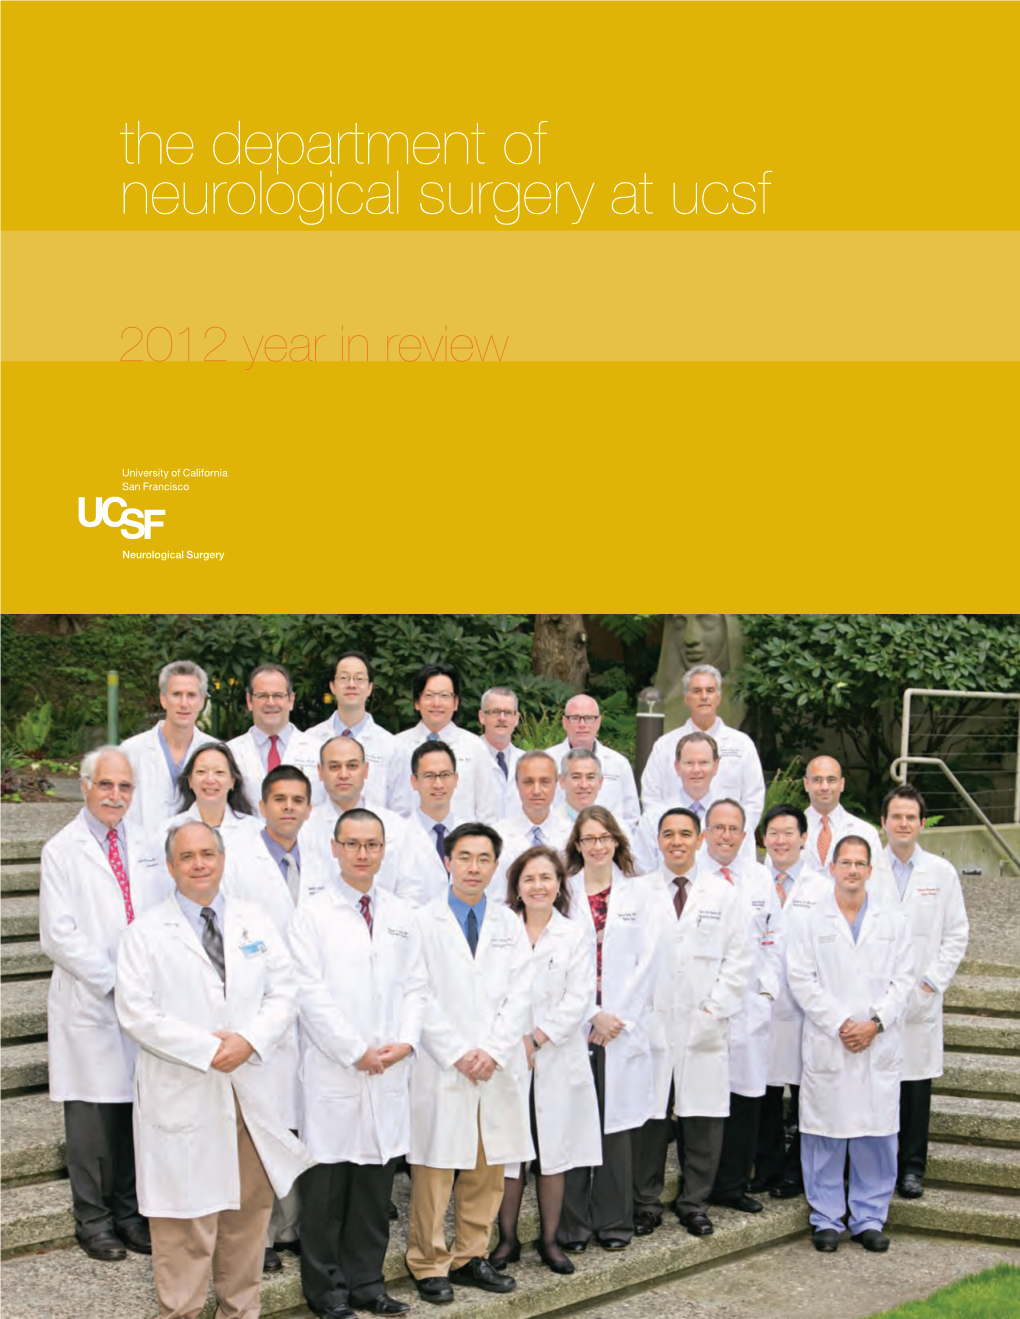 The Department of Neurological Surgery at Ucsf